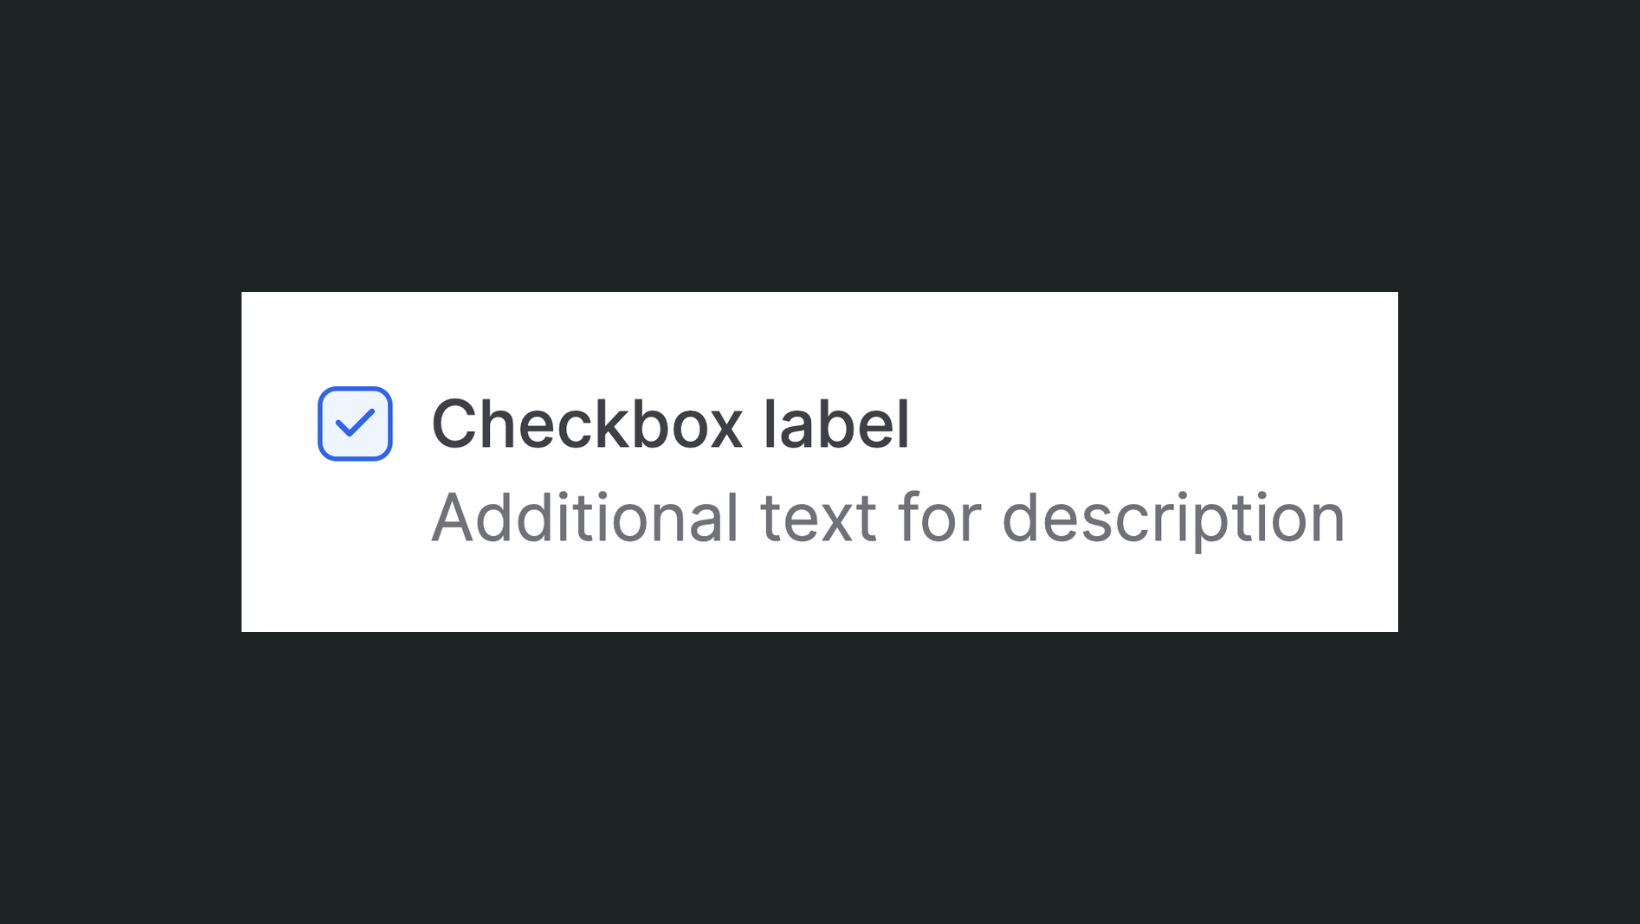 Checkbox from the toolkit